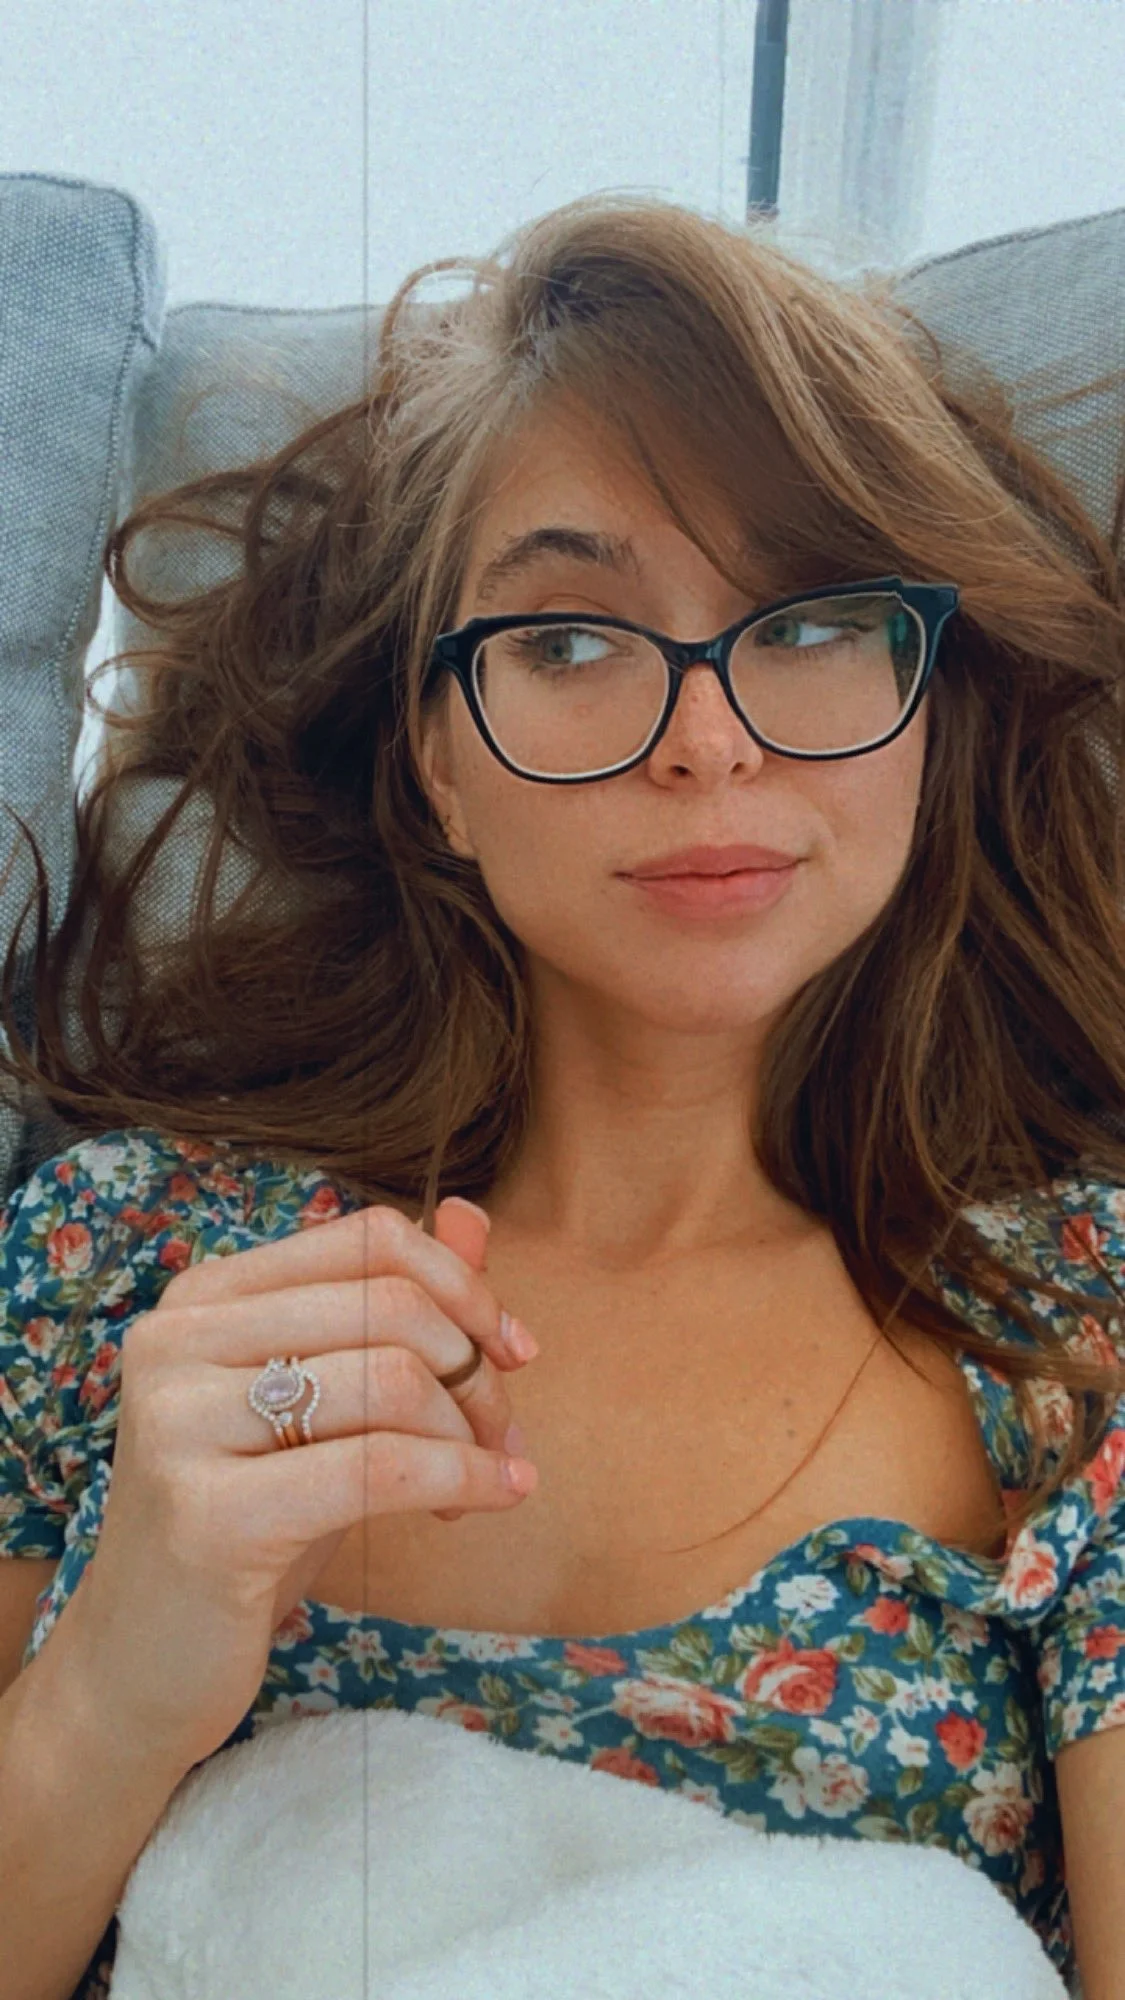 Riley (@rileyreidx3) posting Instagram picture wearing a floral dress matched with her eye glasses makes him looks so beautiful 